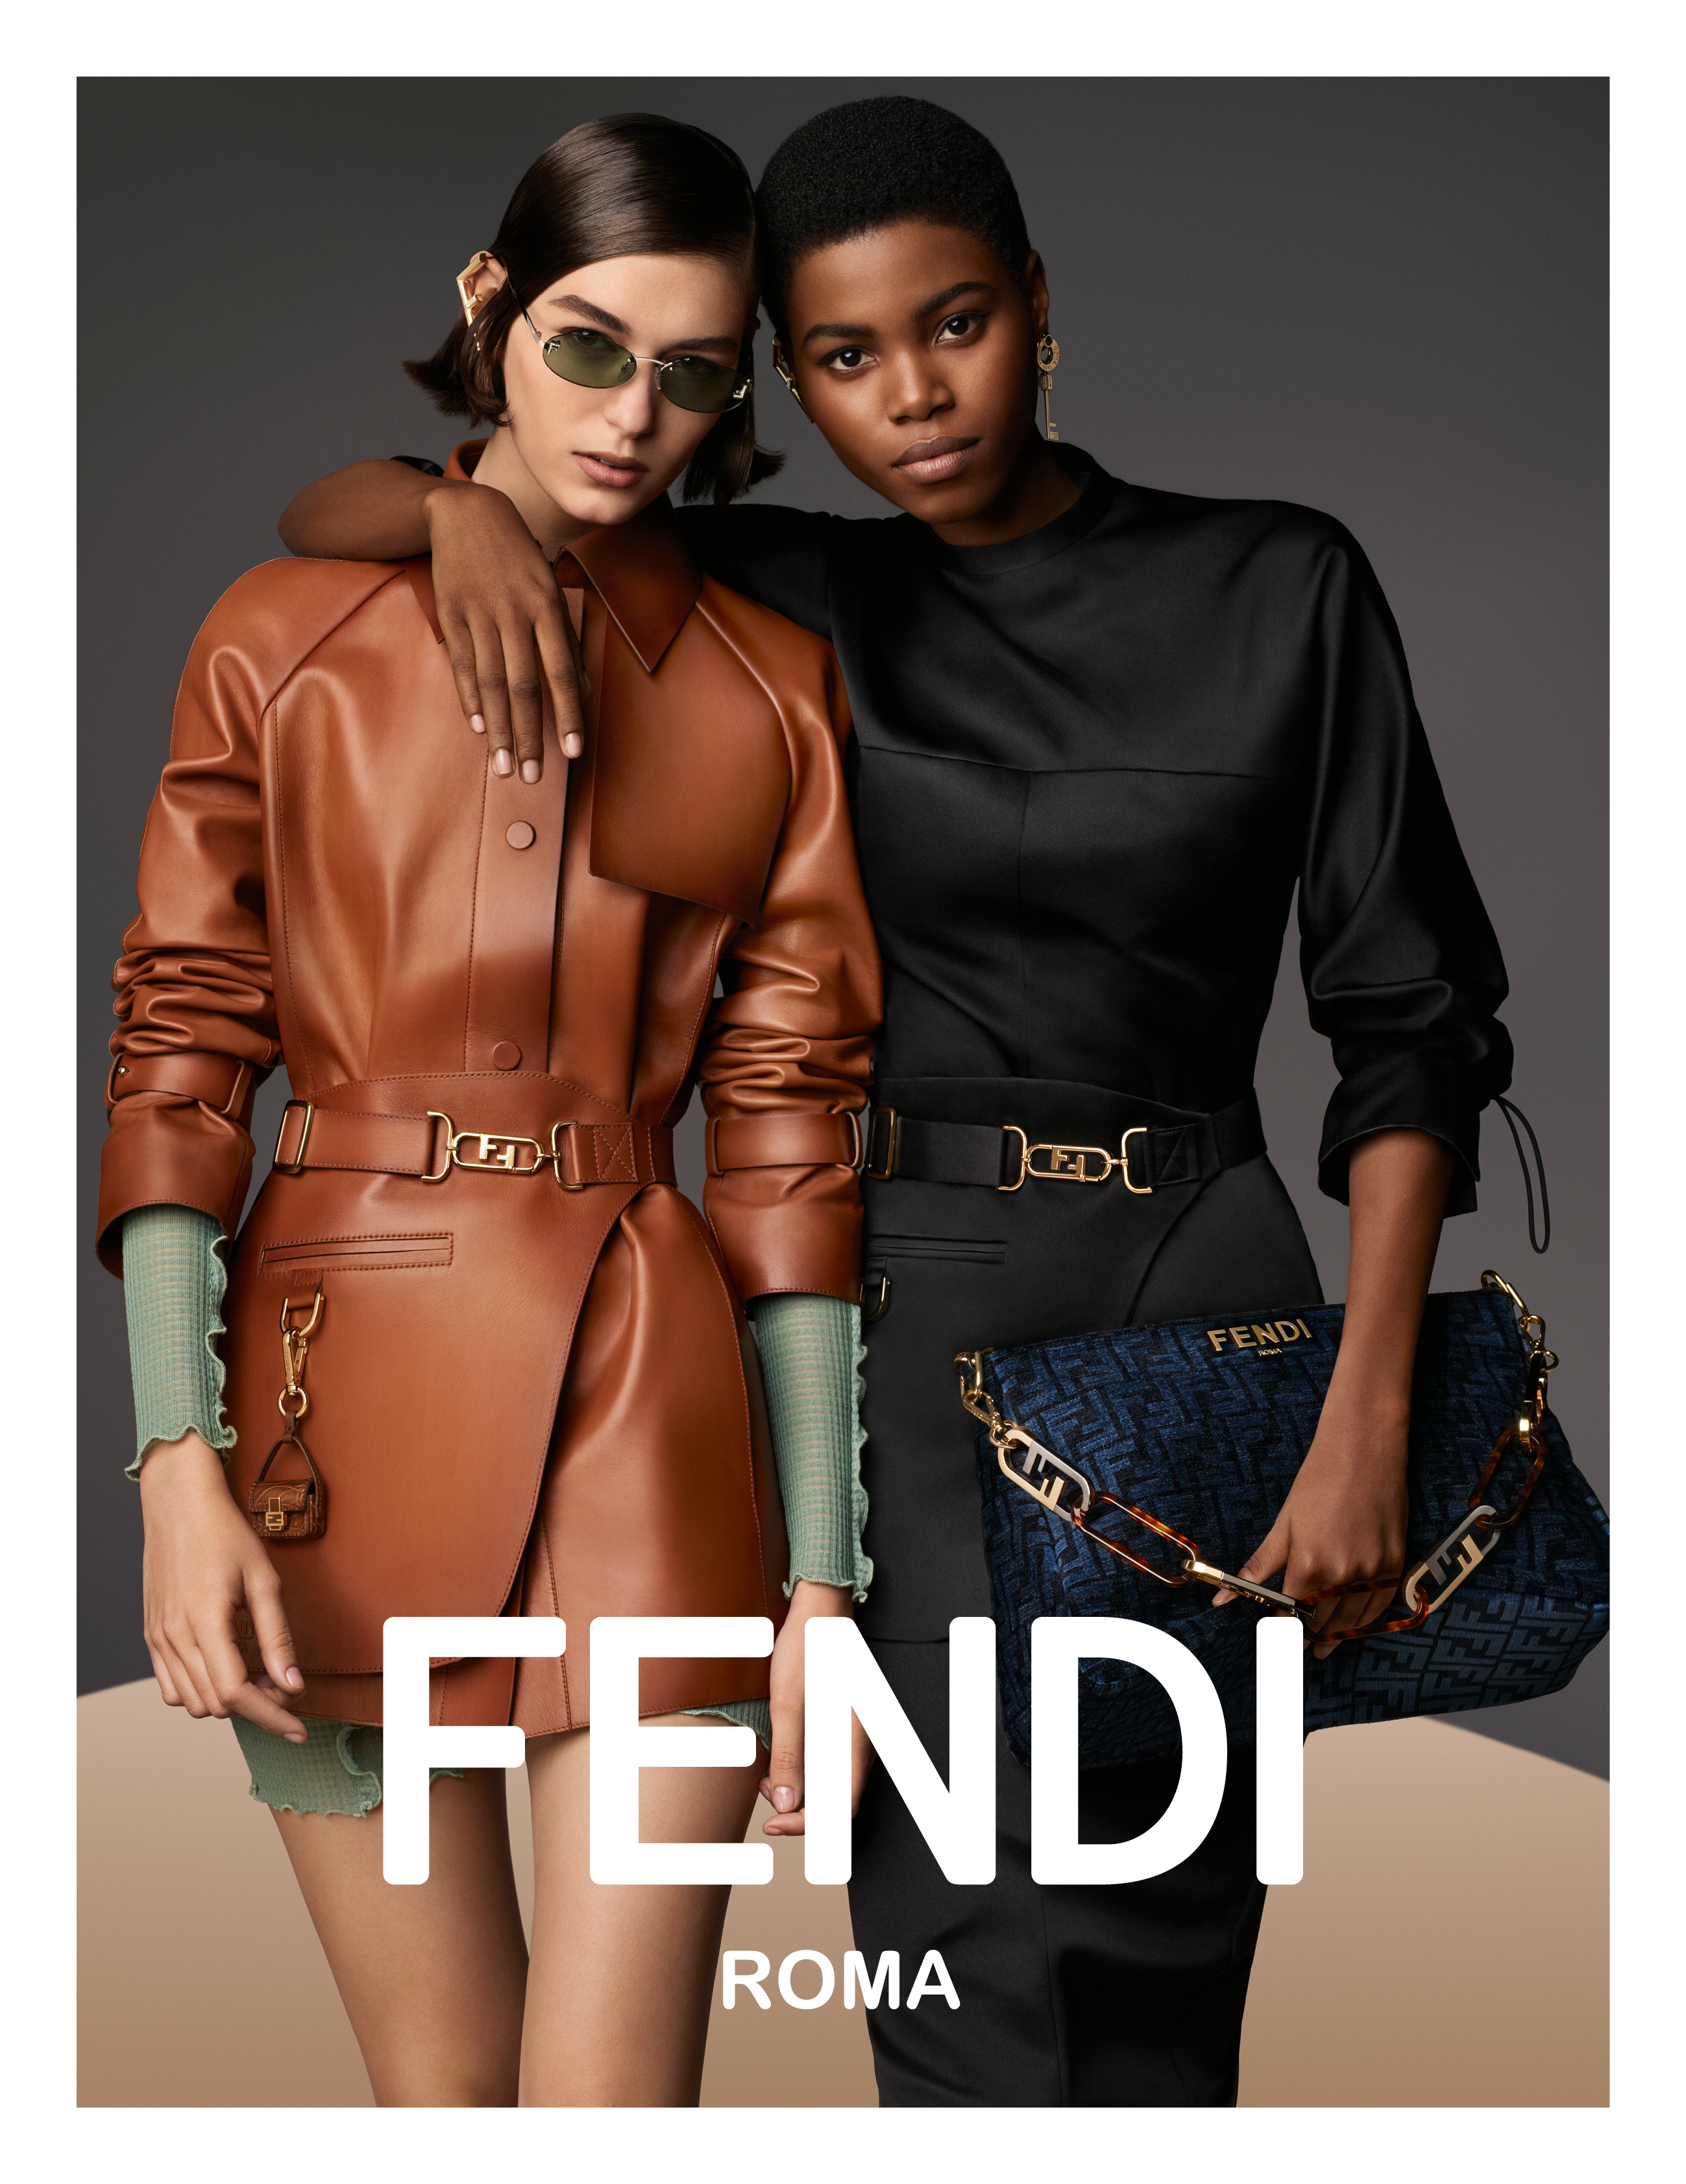 FENDI's Fall/Winter 2022 Collection Fuses The Past And Present